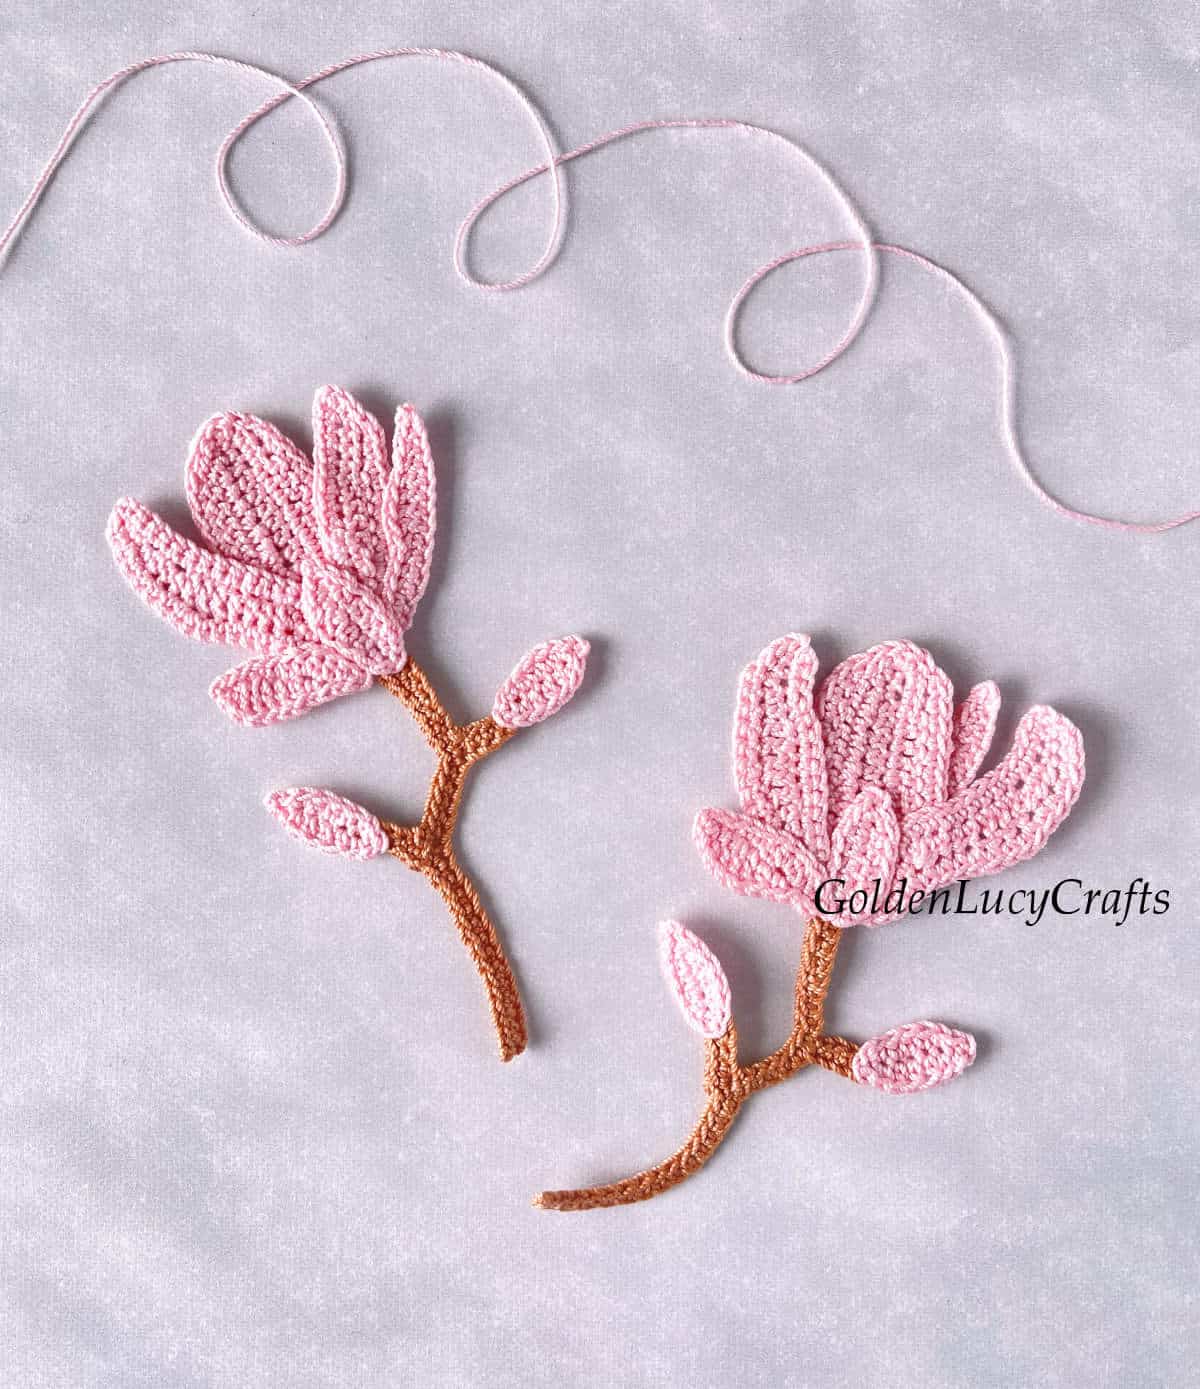 Two crocheted magnolia flowers.